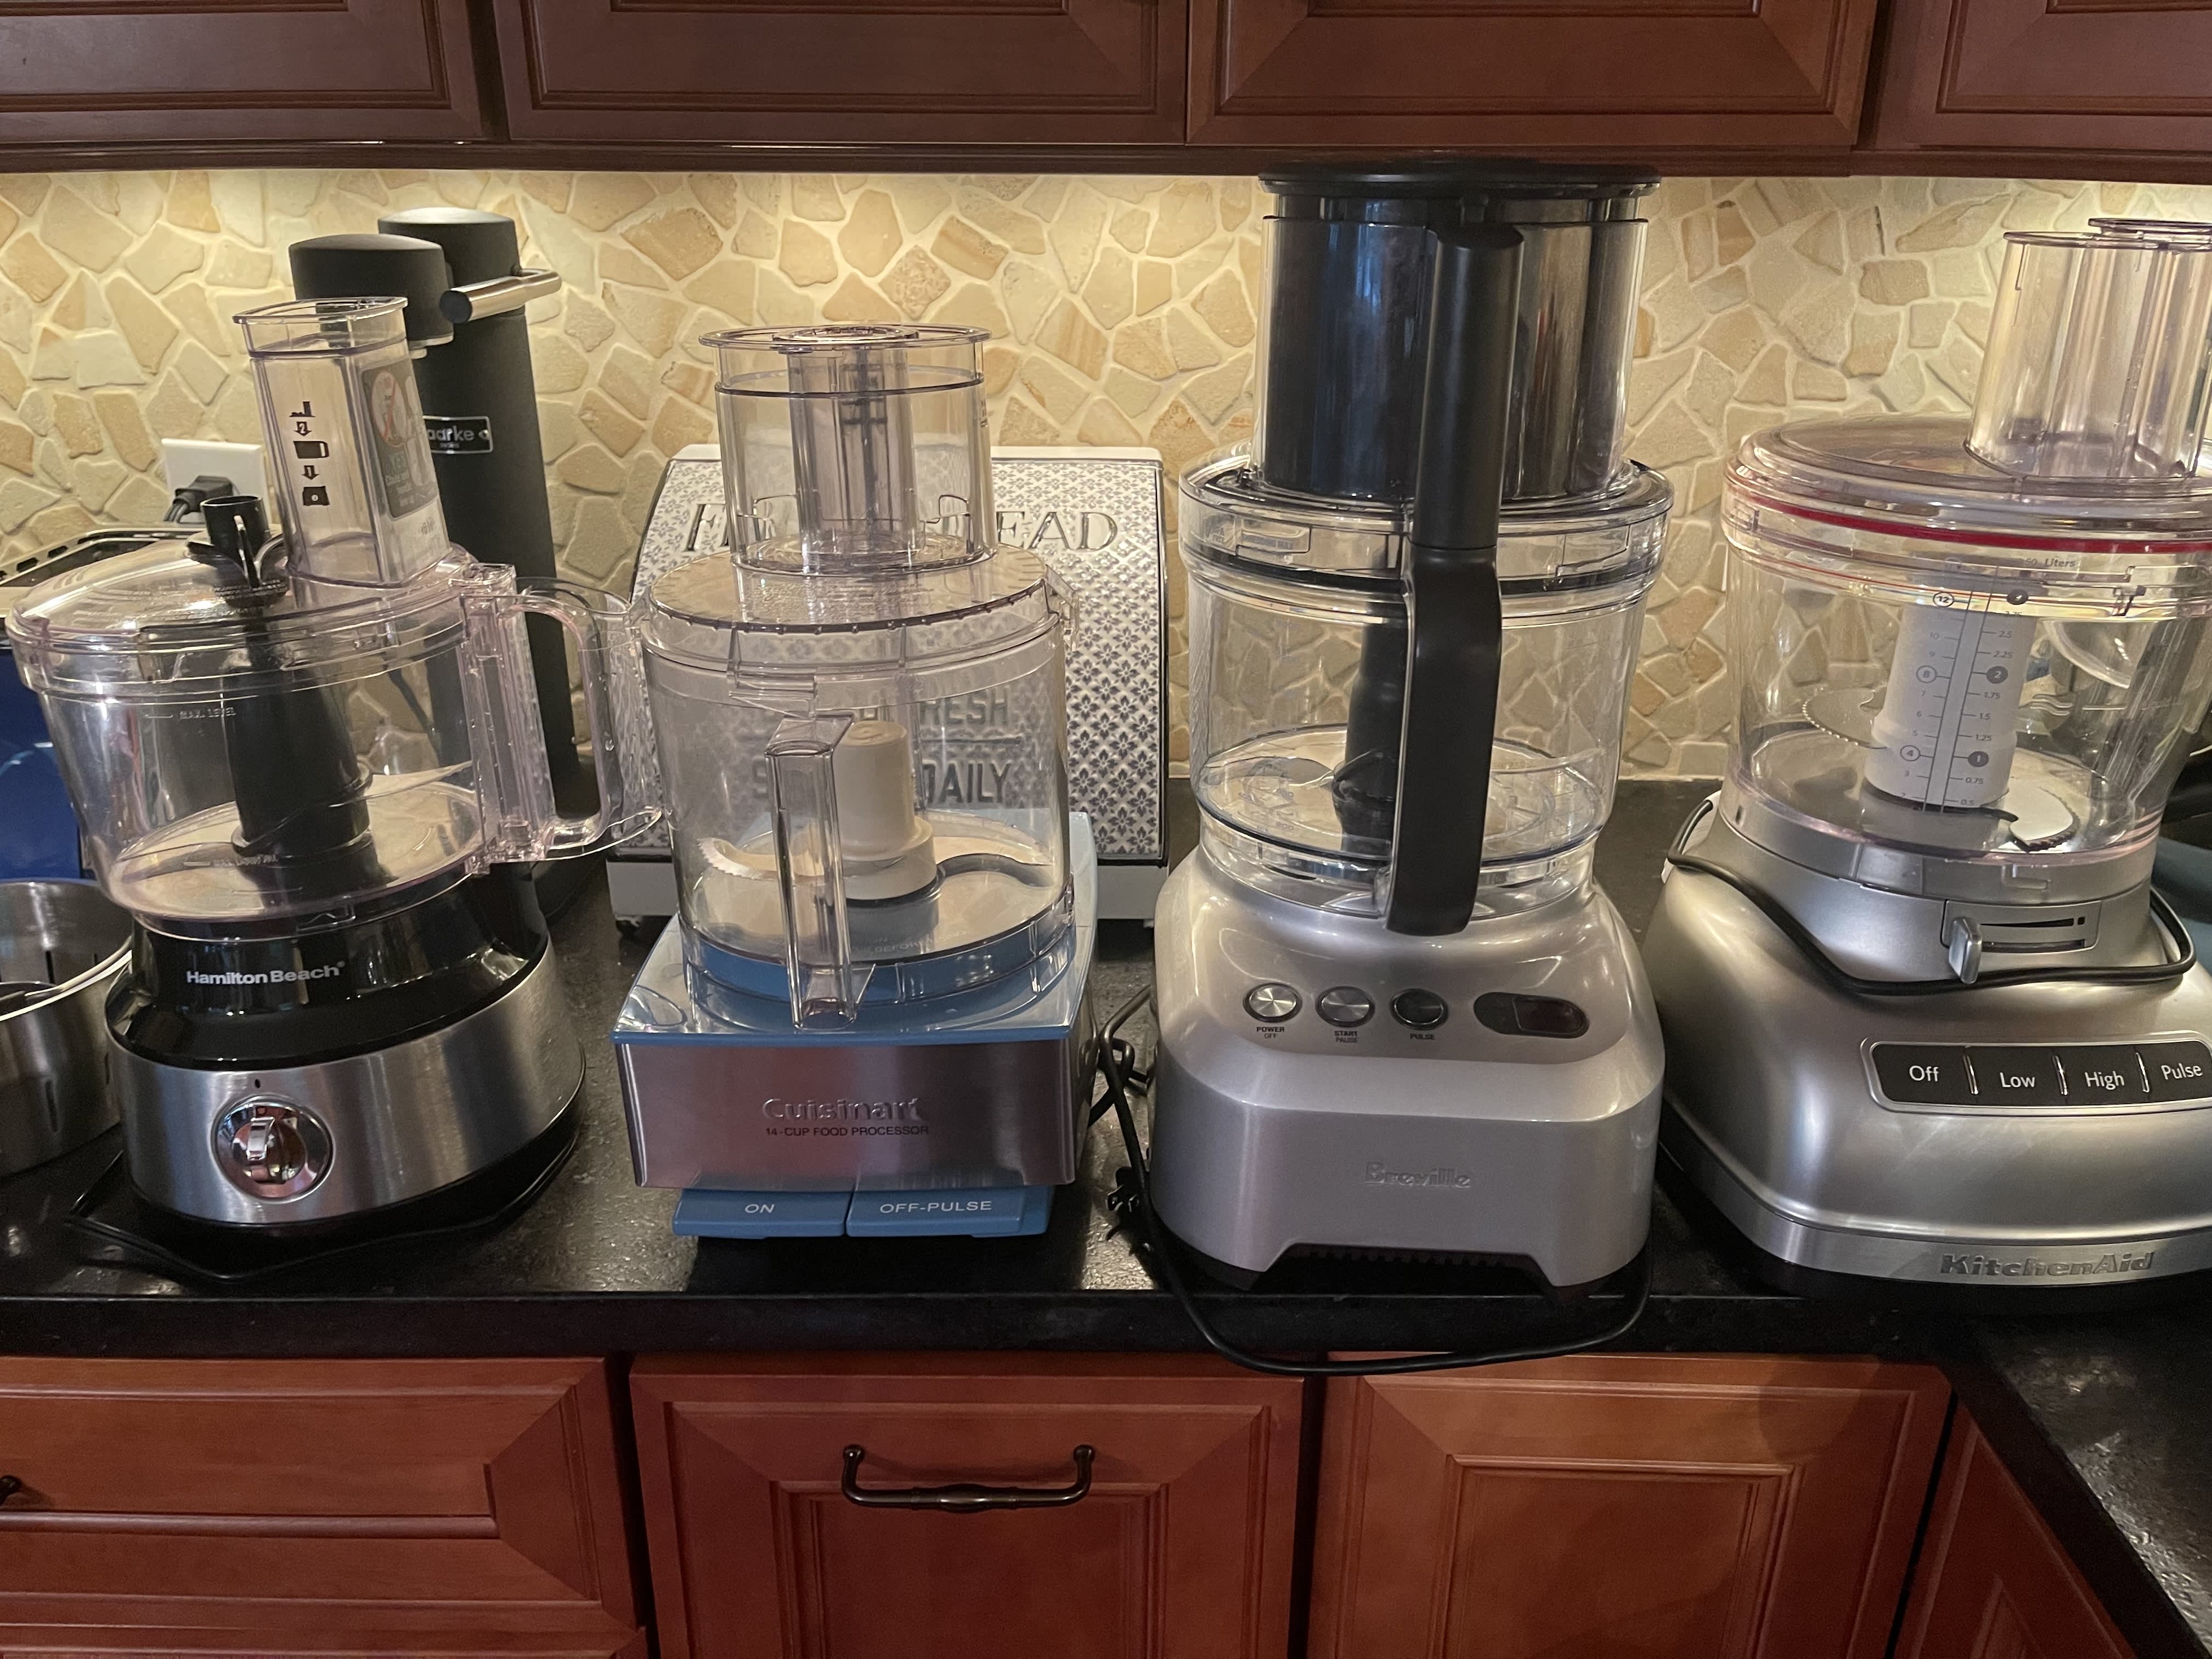 The 4 Best Food Processors Buy in 2021 (Tested Reviewed) |